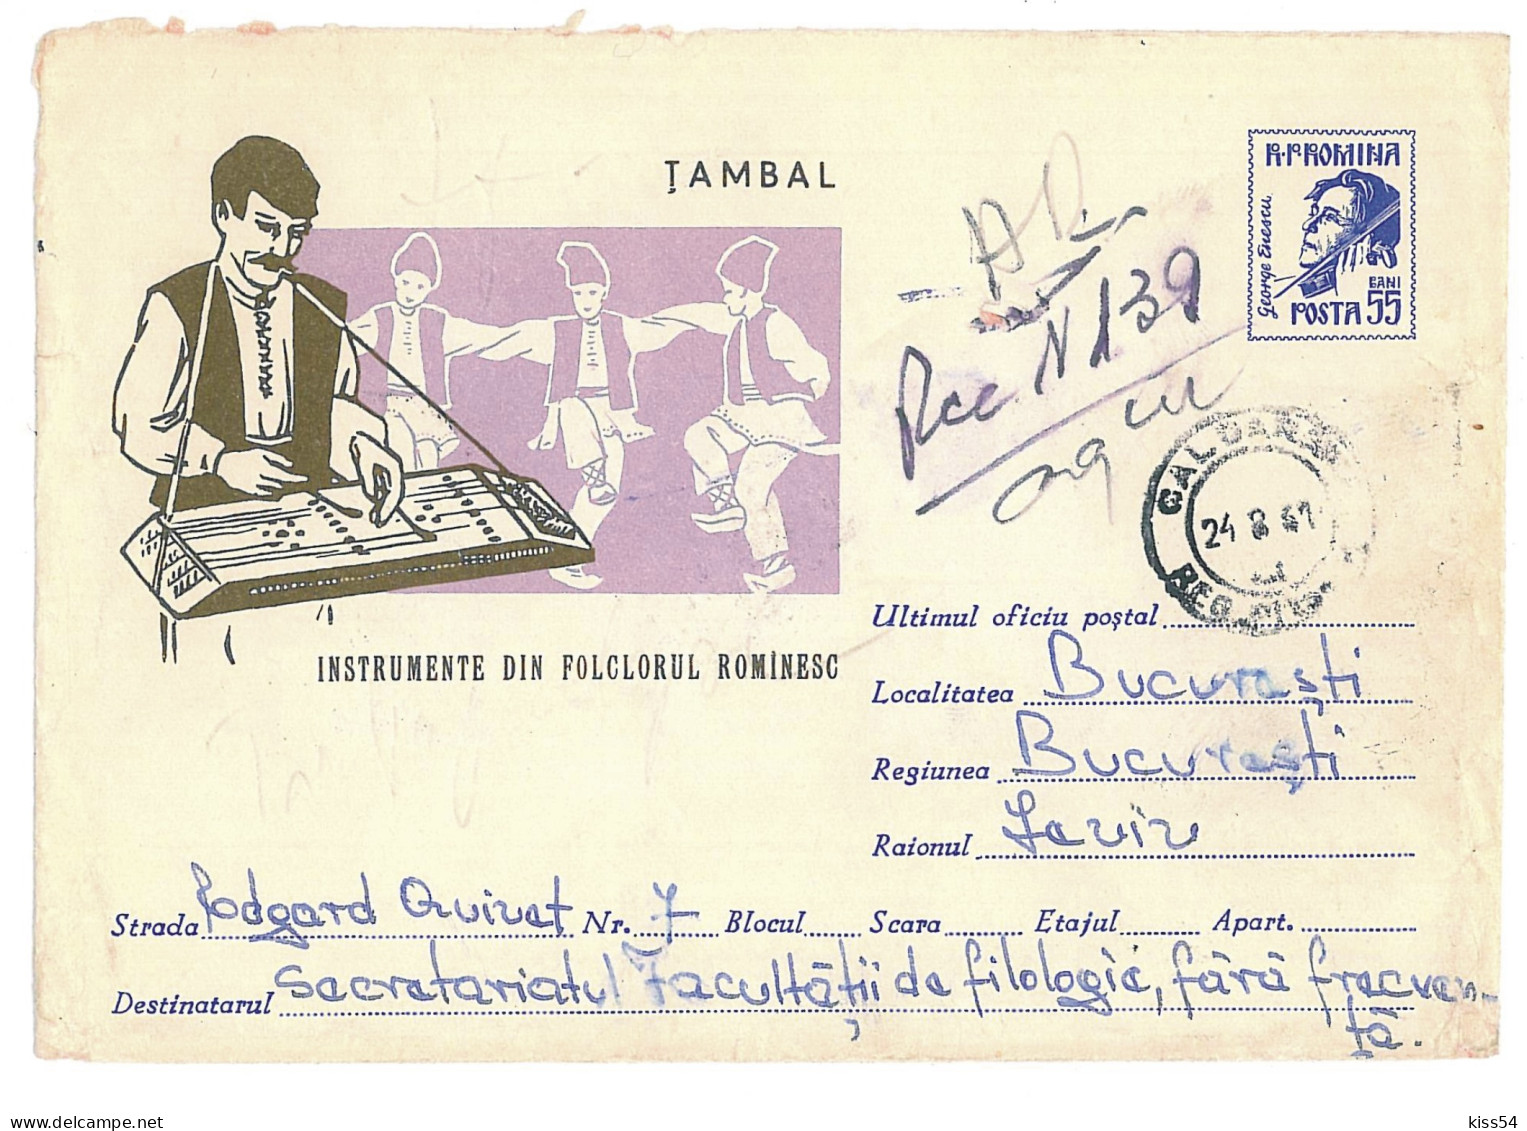 IP 61 - 0487a MUSIC, Popular Musical Instruments, Cimbalom, Romania - REGISTERED Stationery - Used - 1961 - Postal Stationery